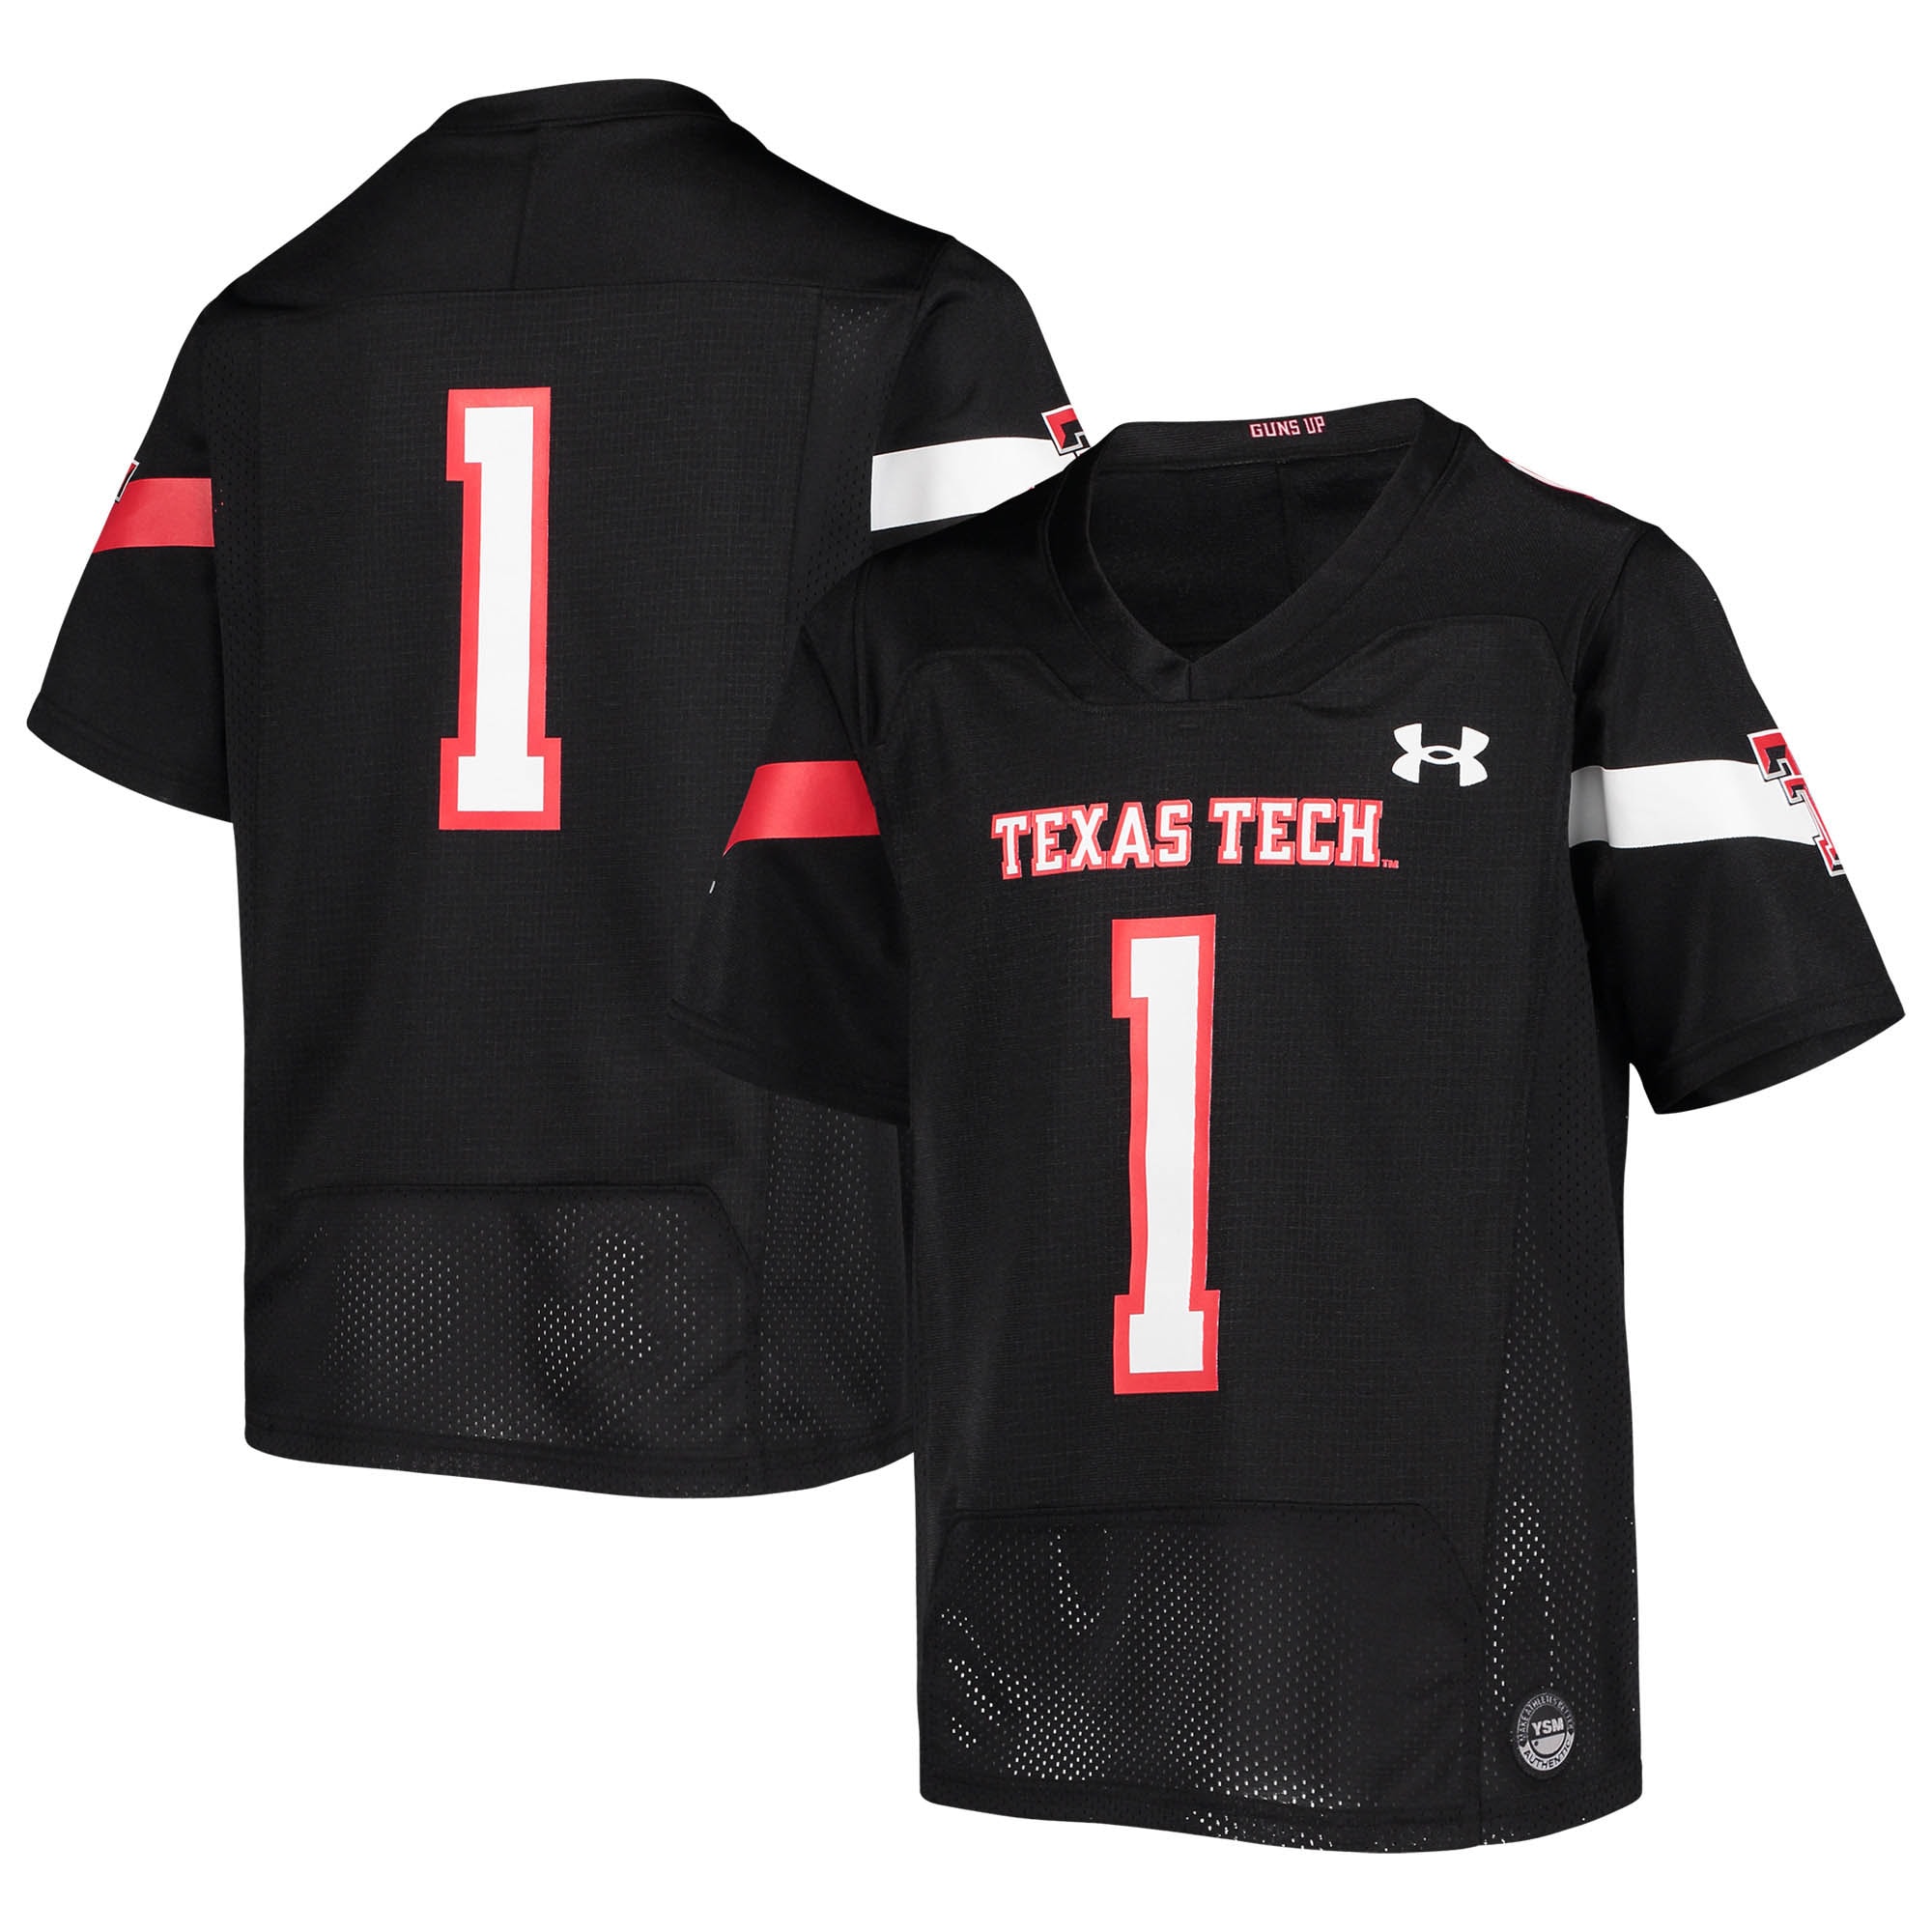 #1 Texas Tech Red Raiders Under Armour Youth Replica  Football Shirts Jersey - Black For Youth Women Men